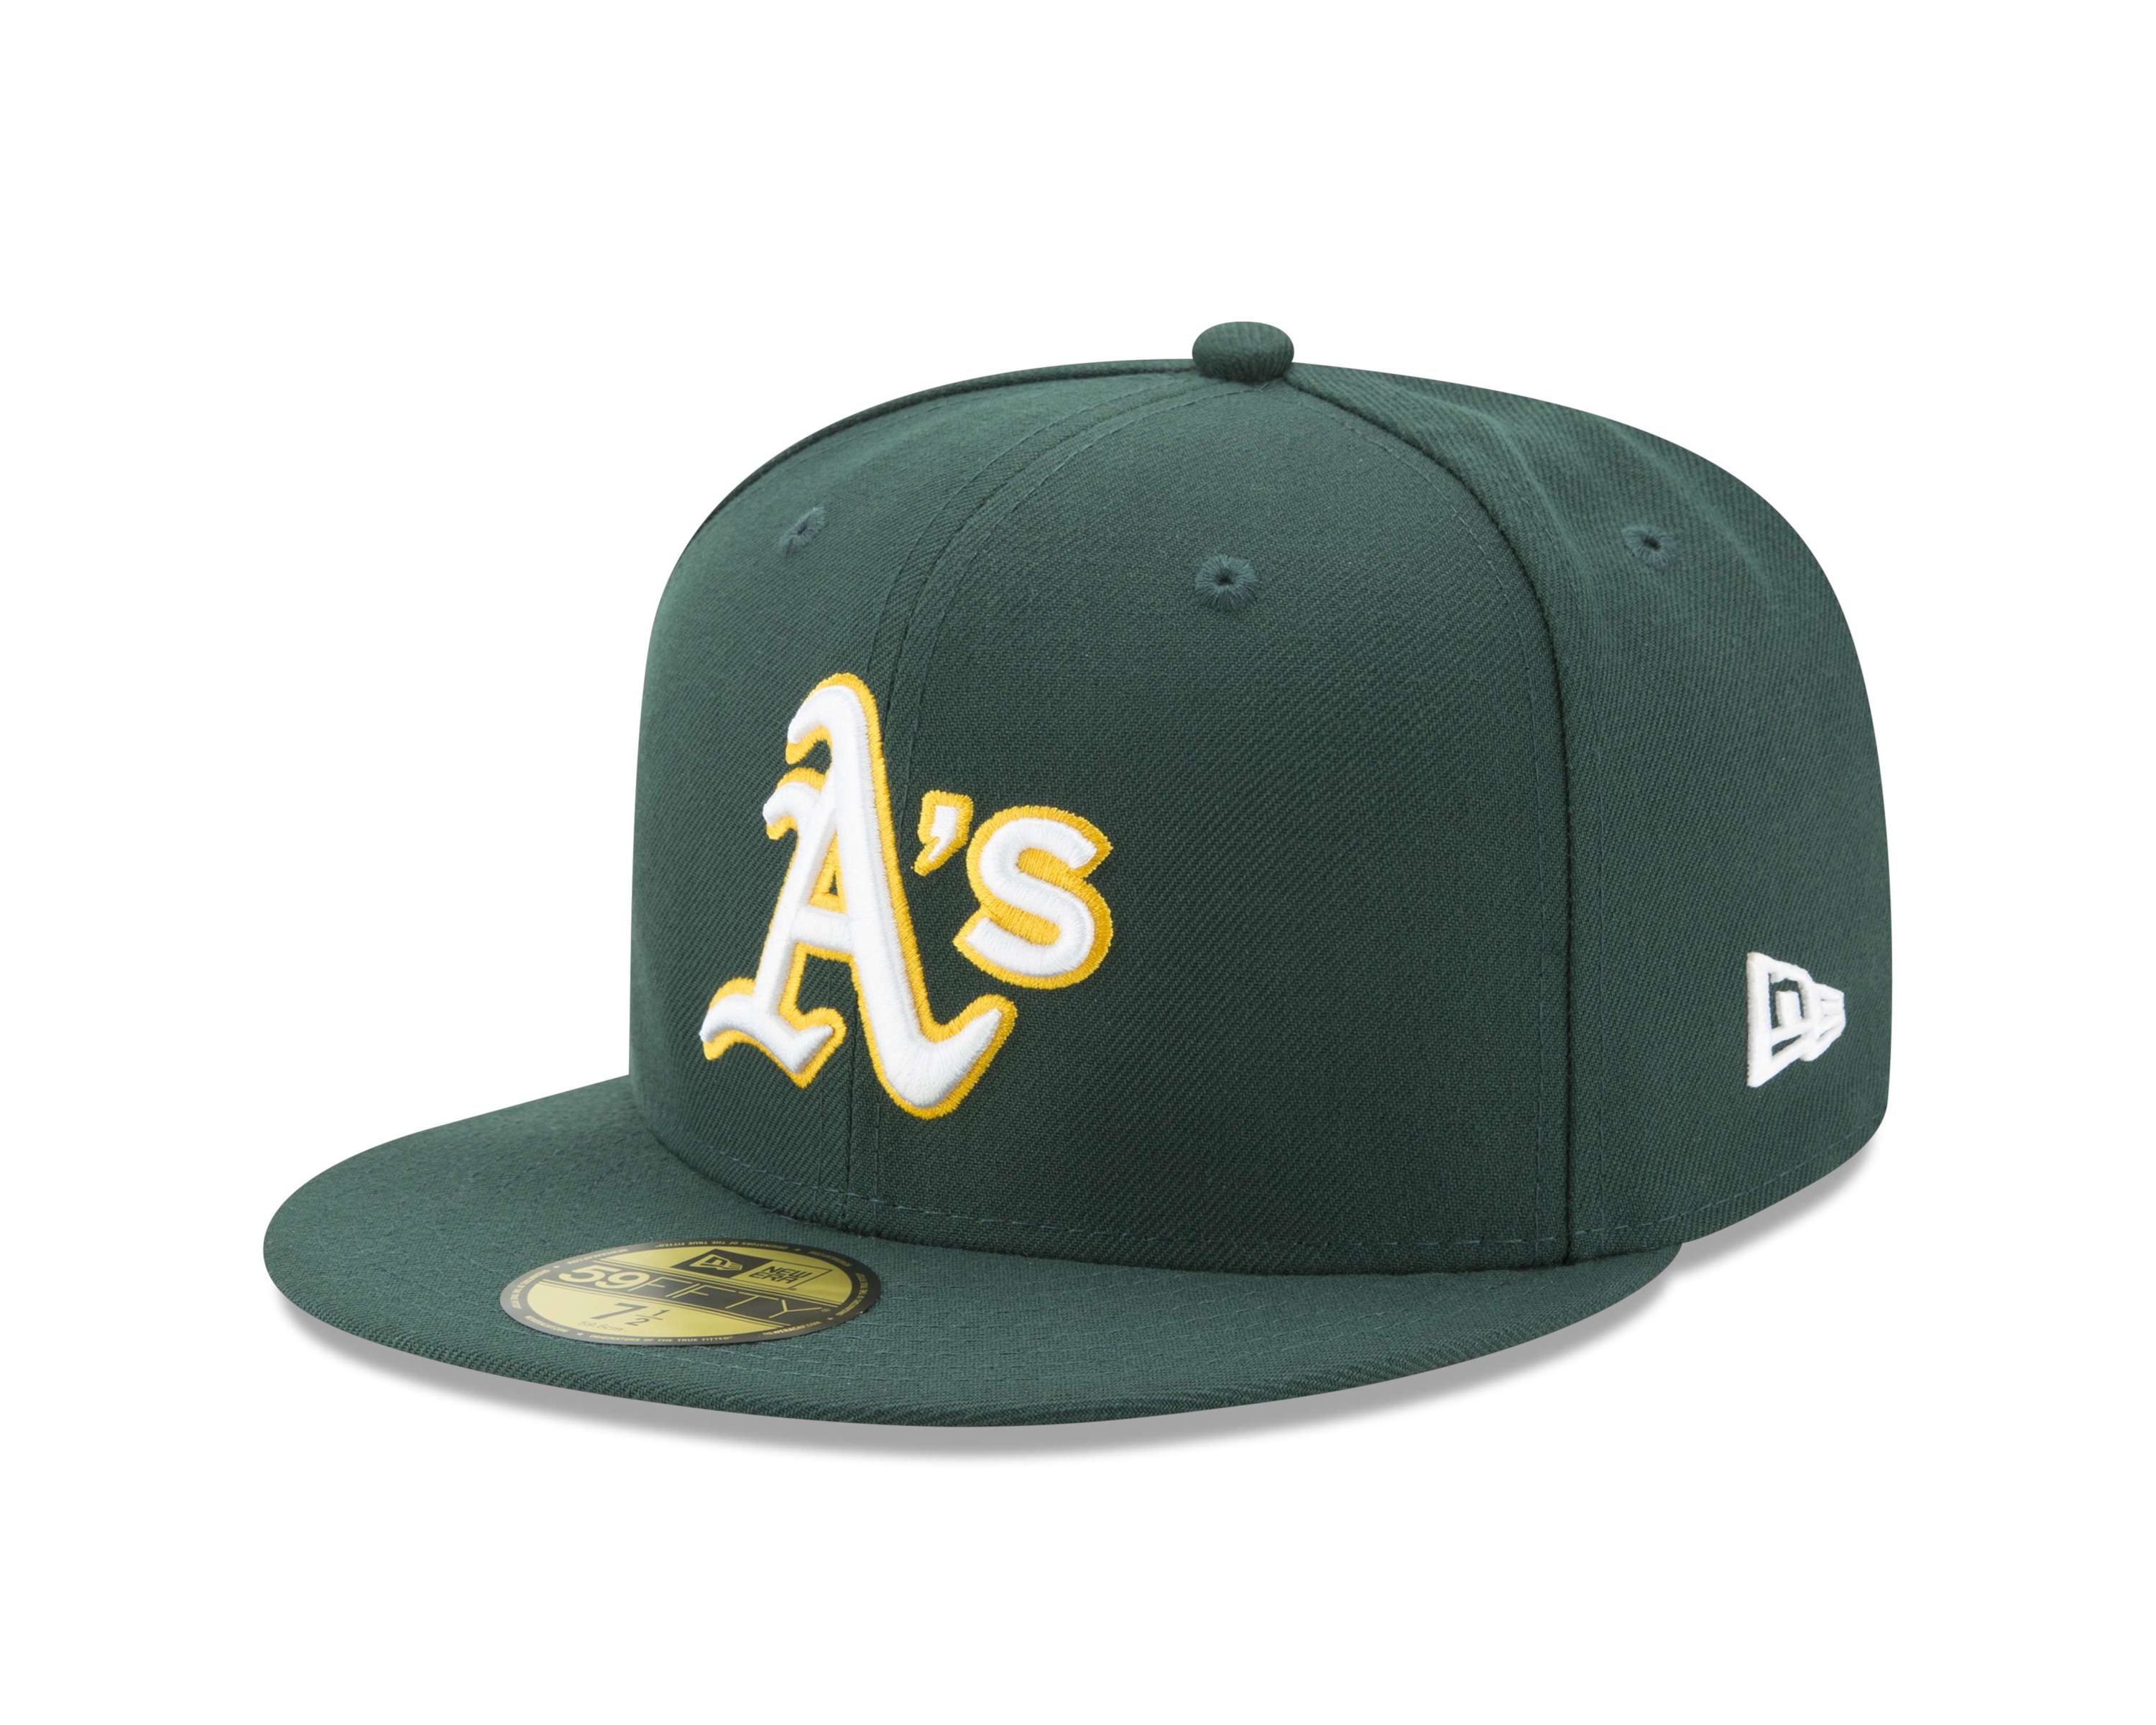 New Era - MLB Oakland Athletics Authentic Collection Alternate Fitted Cap -